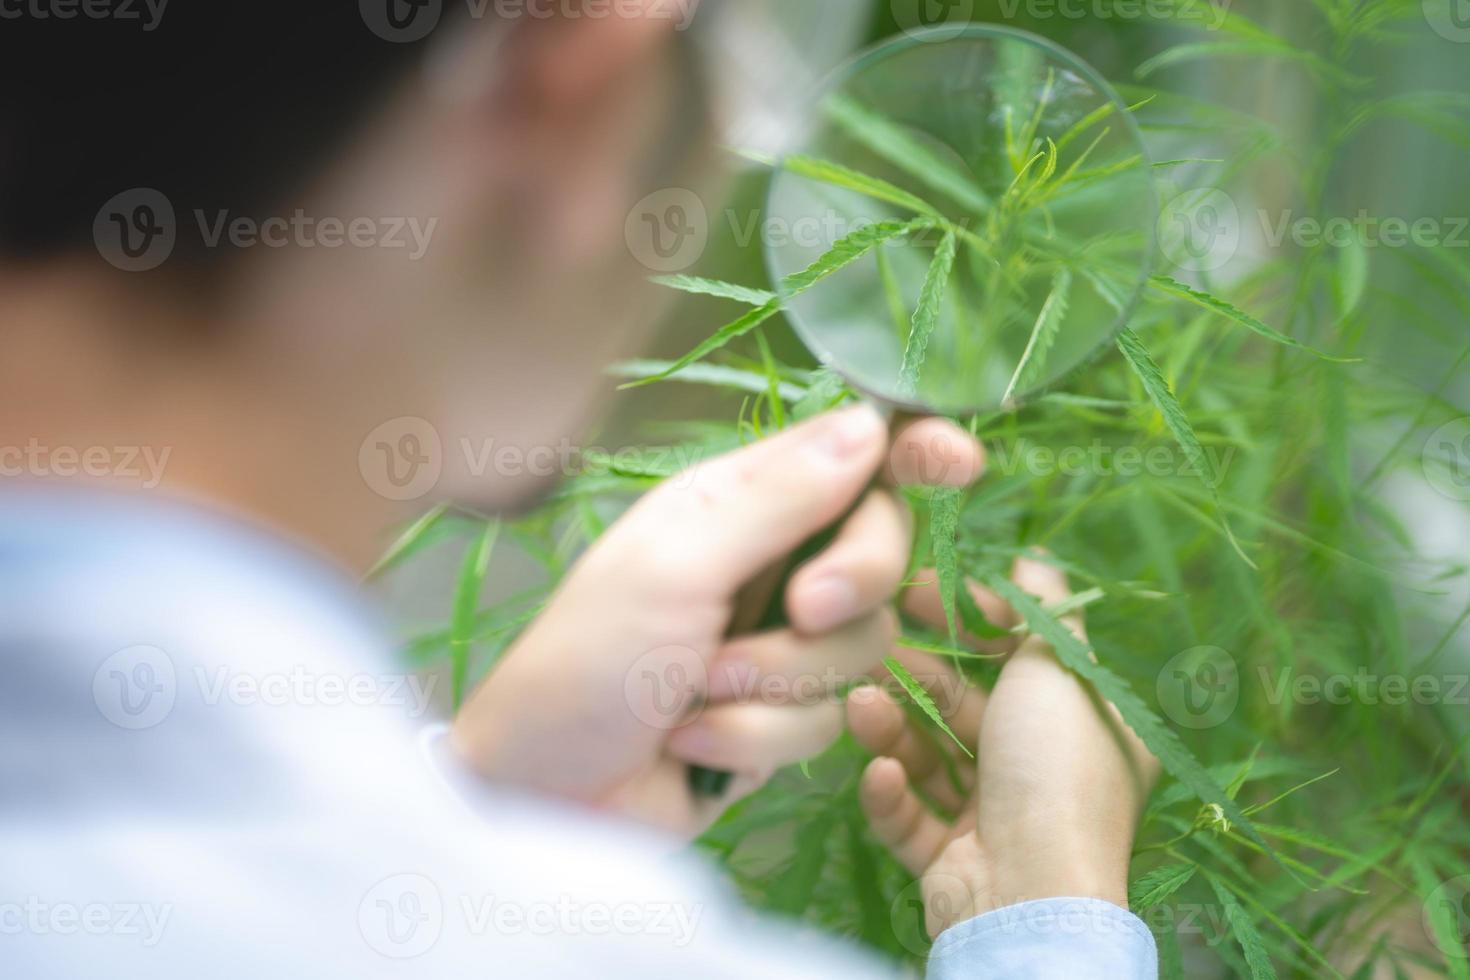 scientist checking on organic cannabis hemp plants in a weed greenhouse. Concept of legalization herbal for alternative medicine with cbd oil, commercial pharmaceutical in medicine business industry photo